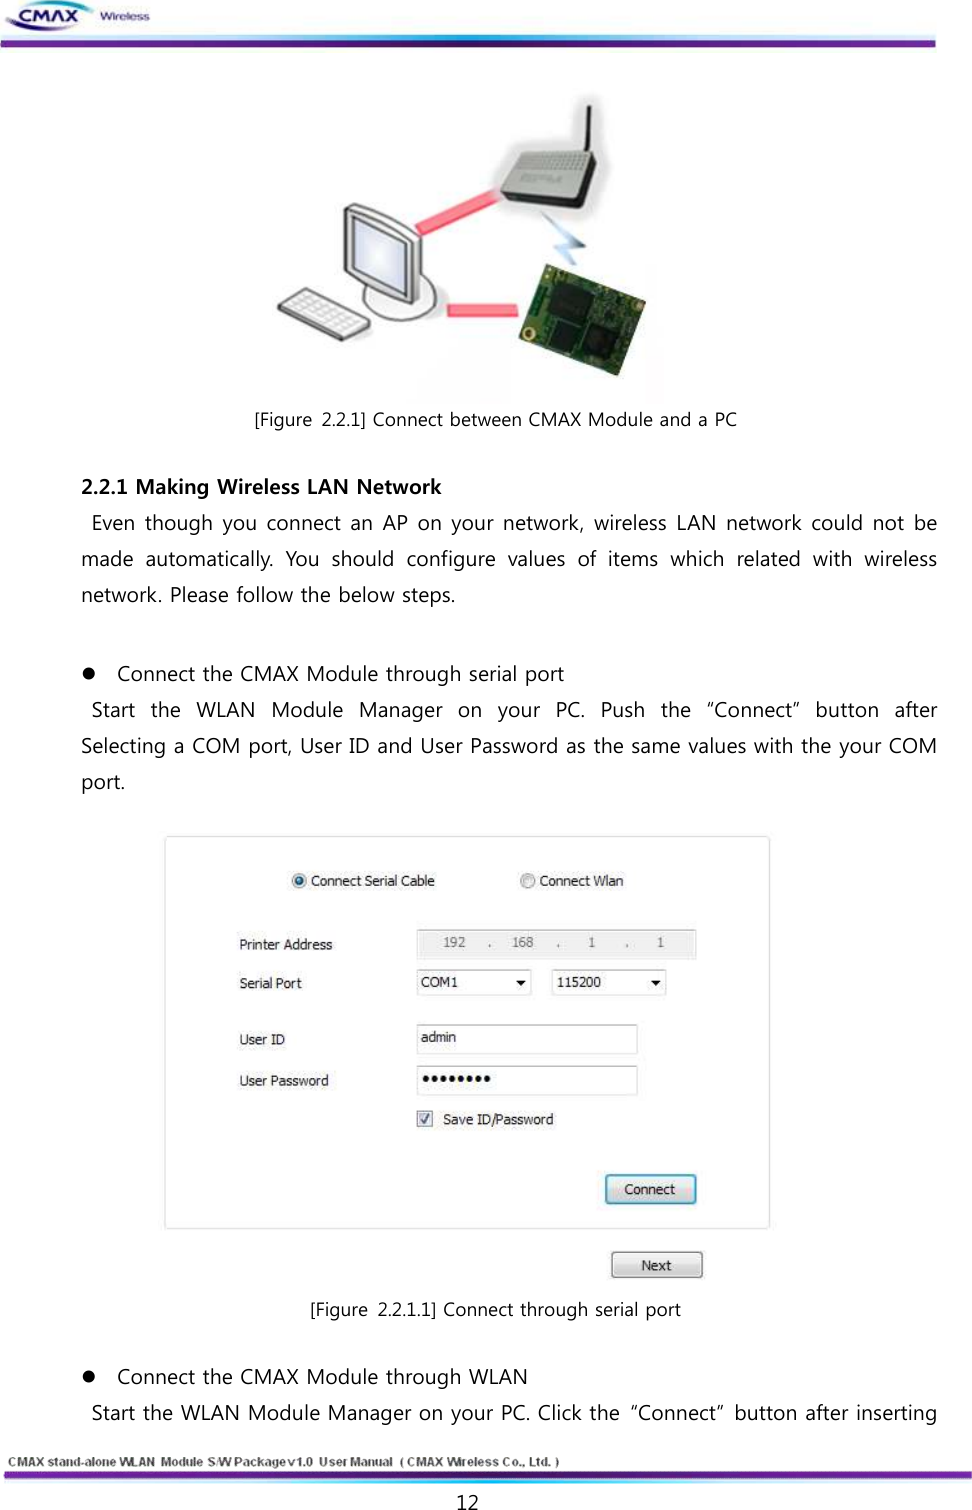   12  www.cmaxwireless.co.kr  [Figure 2.2.1] Connect between CMAX Module and a PC  2.2.1 Making Wireless LAN Network   Even though you connect an AP on your network, wireless LAN network could not be made  automatically.  You  should  configure  values  of  items  which  related  with  wireless network. Please follow the below steps.  l Connect the CMAX Module through serial port   Start  the  WLAN  Module  Manager  on  your  PC.  Push  the  “Connect”  button  after Selecting a COM port, User ID and User Password as the same values with the your COM port.   [Figure 2.2.1.1] Connect through serial port  l Connect the CMAX Module through WLAN   Start the WLAN Module Manager on your PC. Click the  “Connect”  button after inserting 